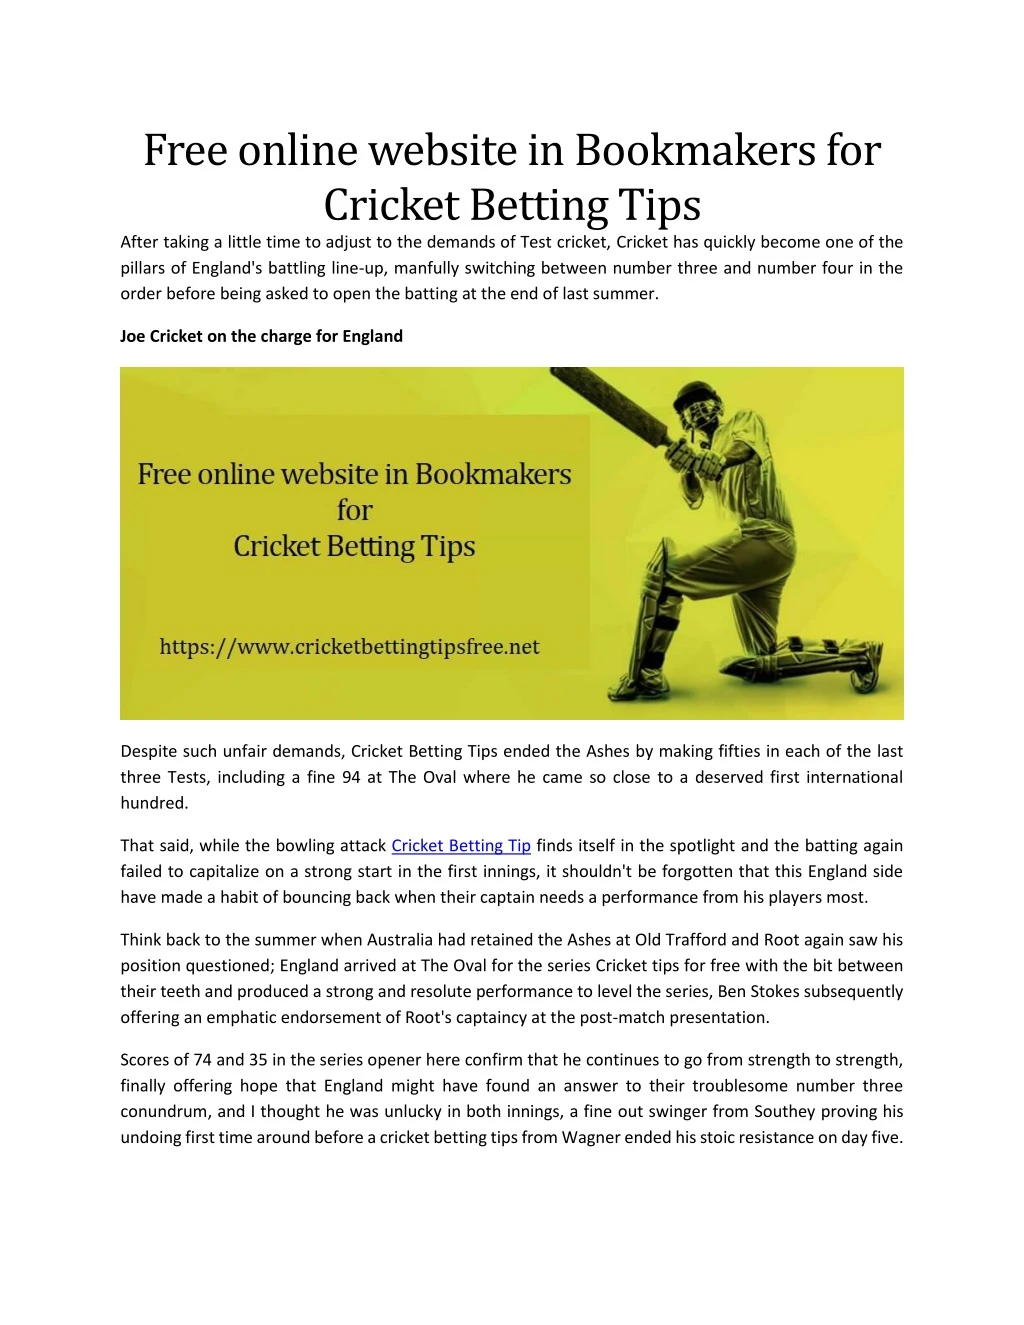 free online website in bookmakers for cricket